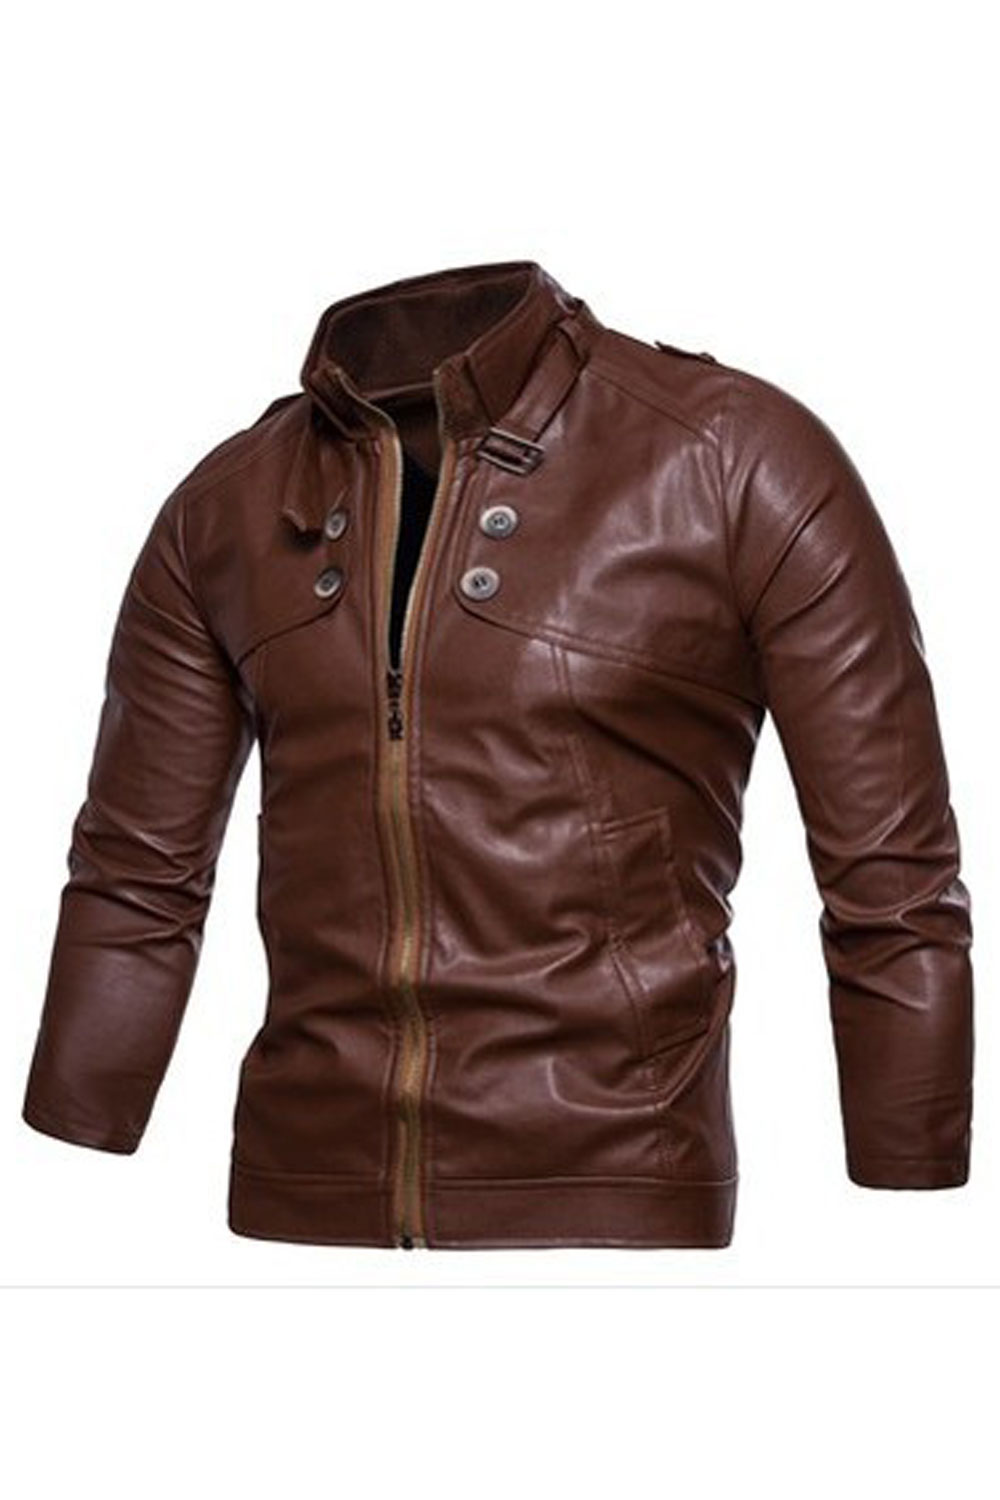 Tom Carry Men Bomber Style Casual Leather Jacket